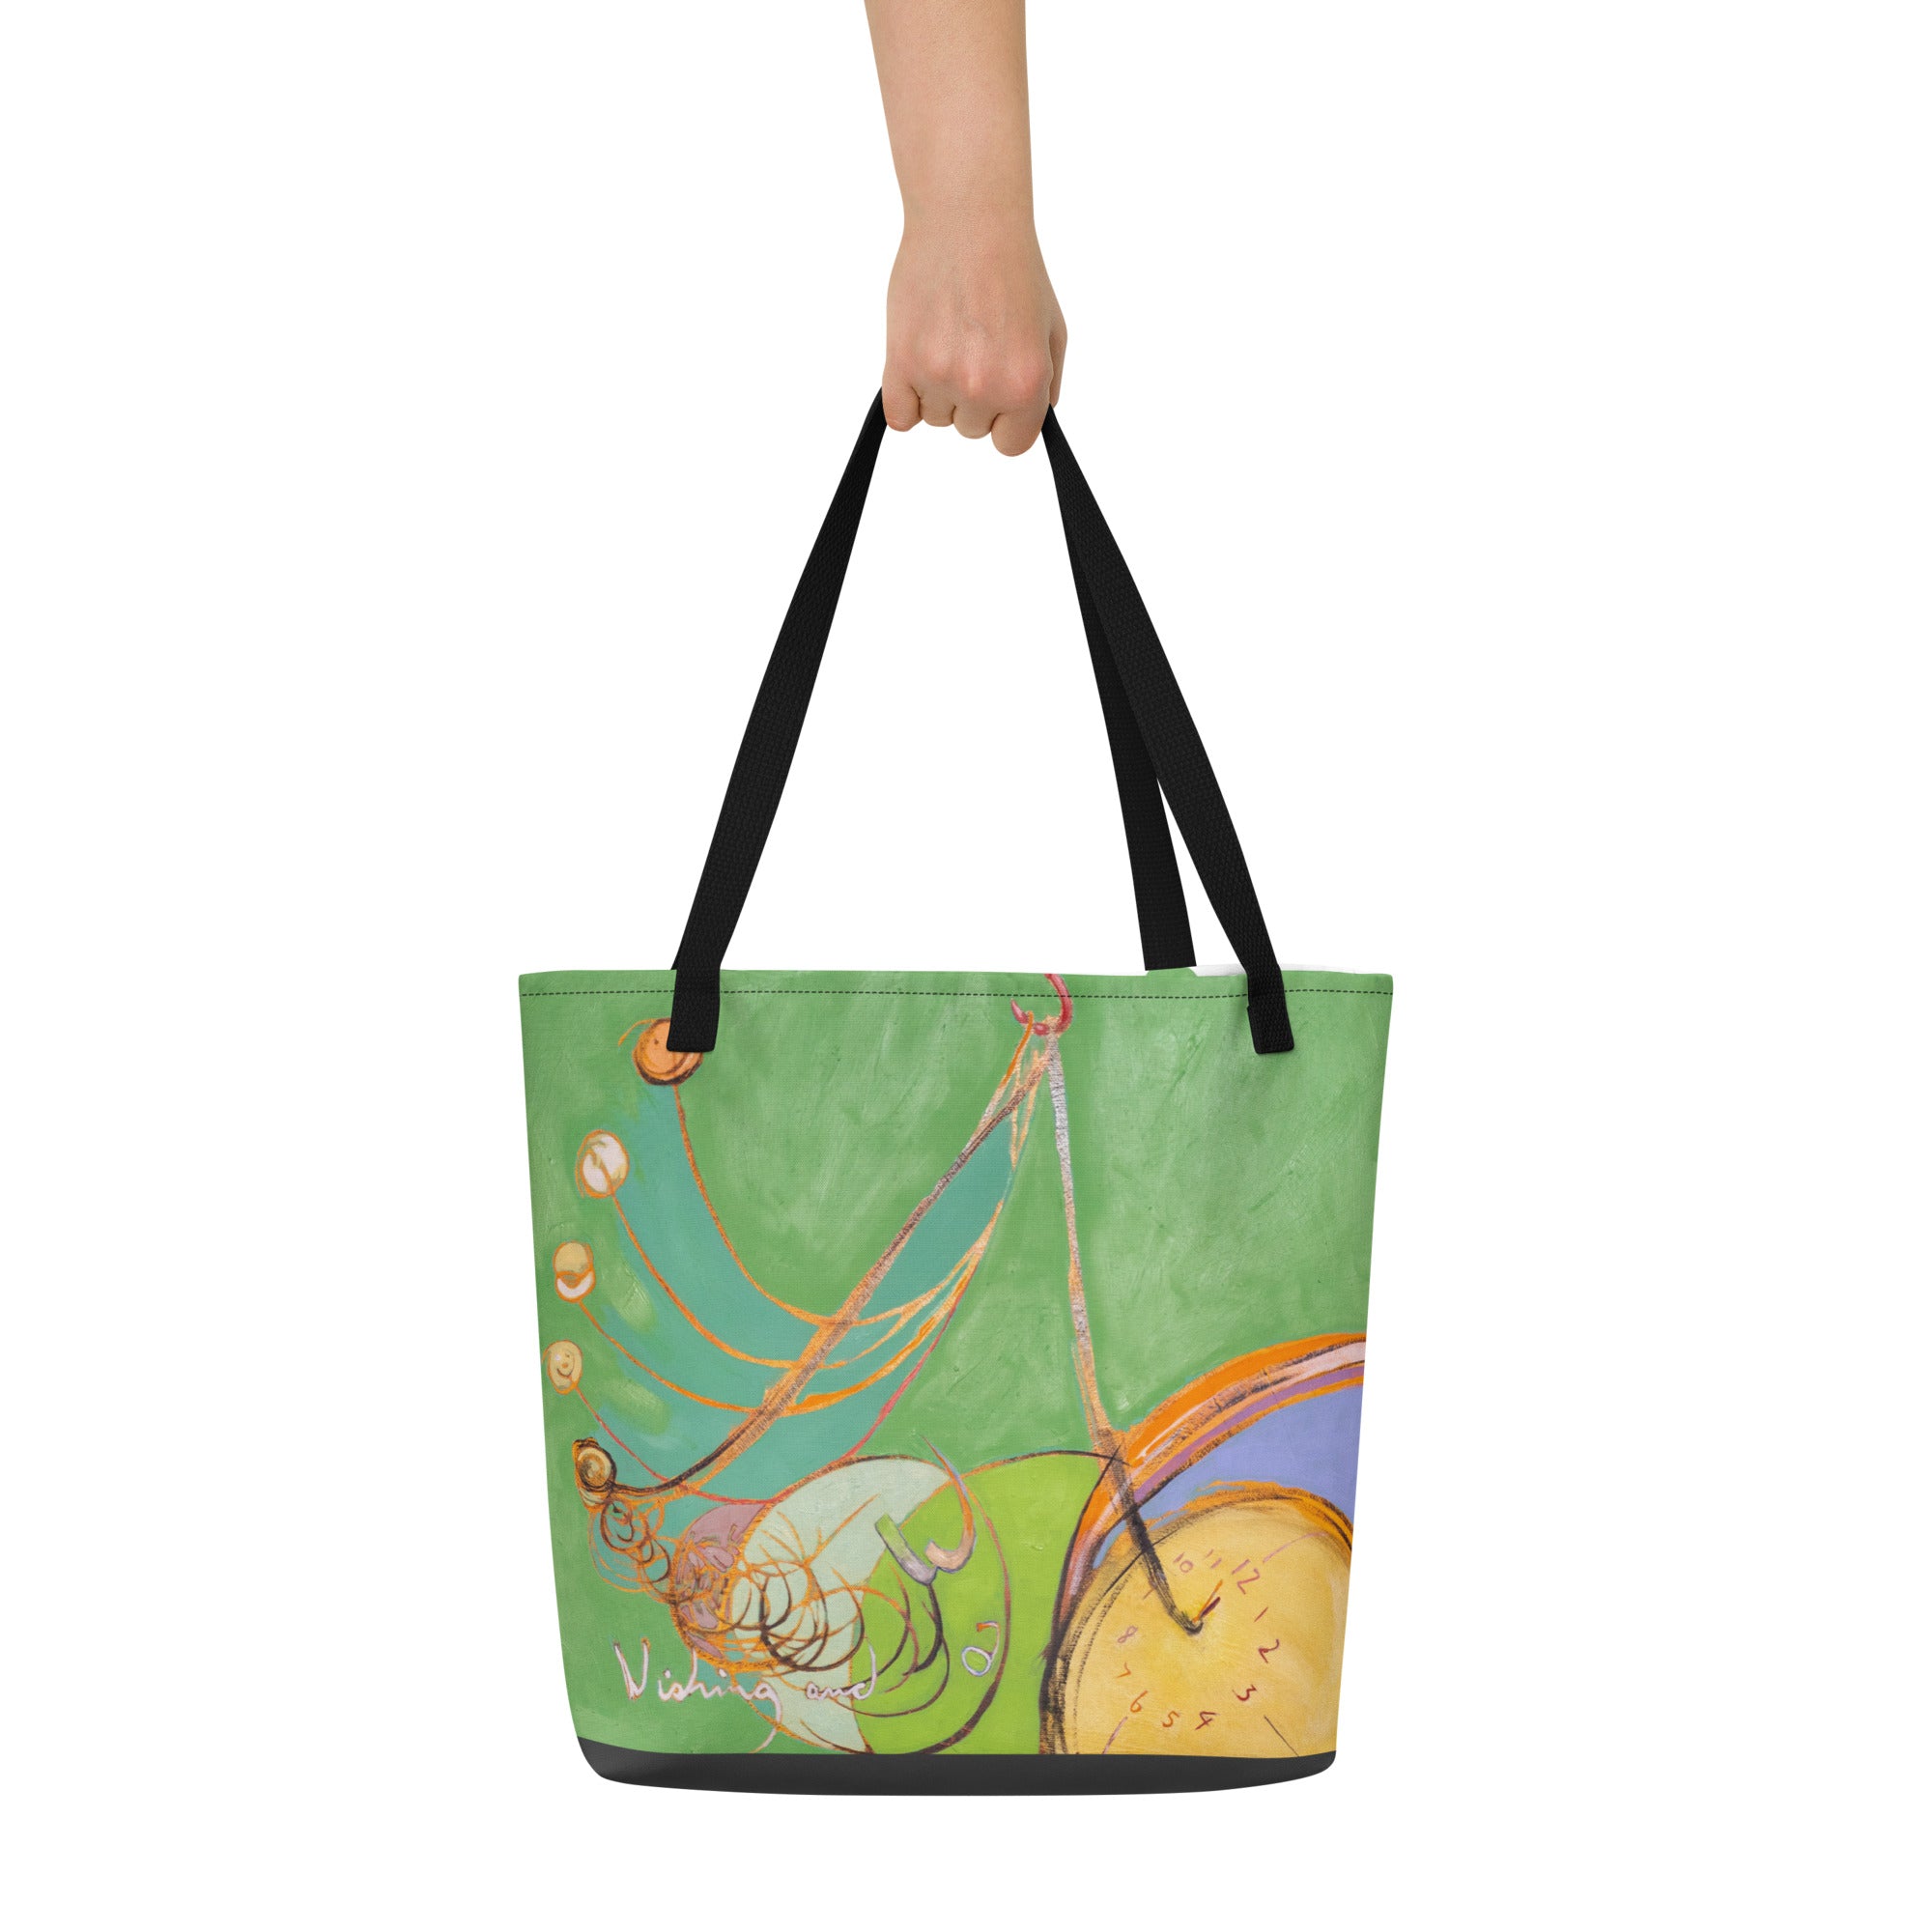 Wishing And Waiting - The Breakthrough [tote bag]